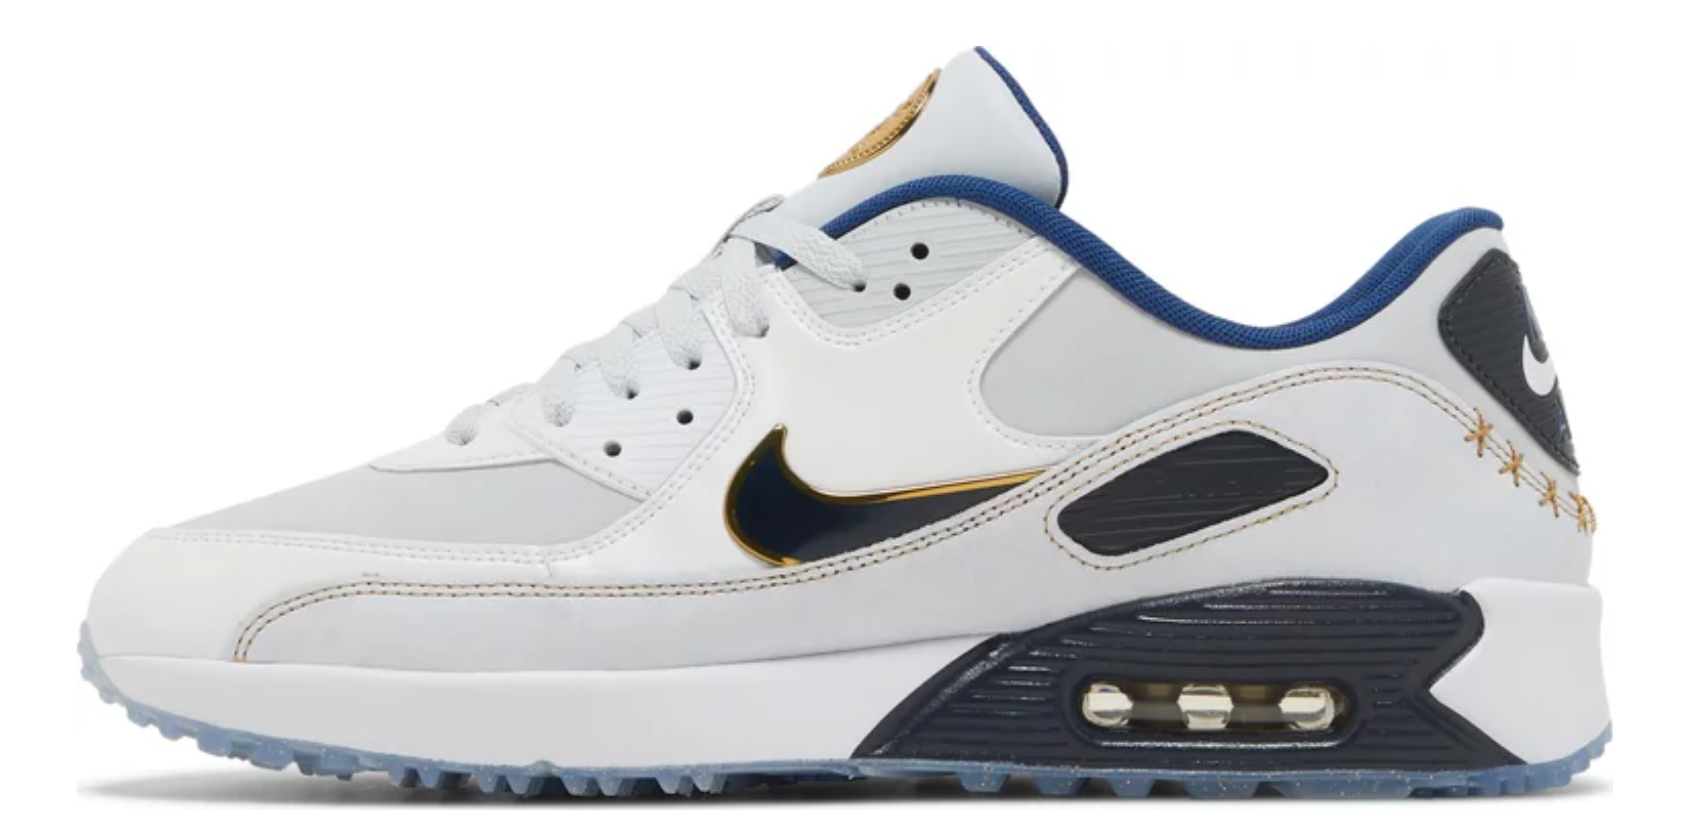 Nike Men's Air Max 90 Golf NRG 'The Players Championship' Sneakers